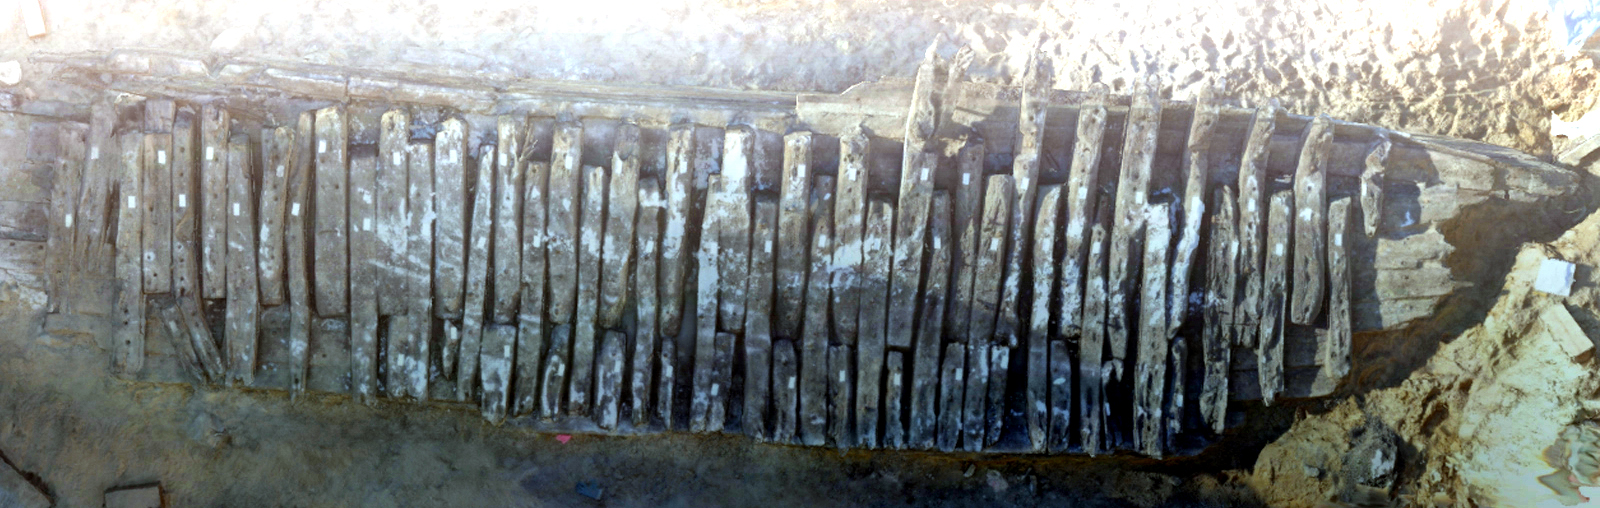 timbers of the Alexandria Virginia ship as excavated